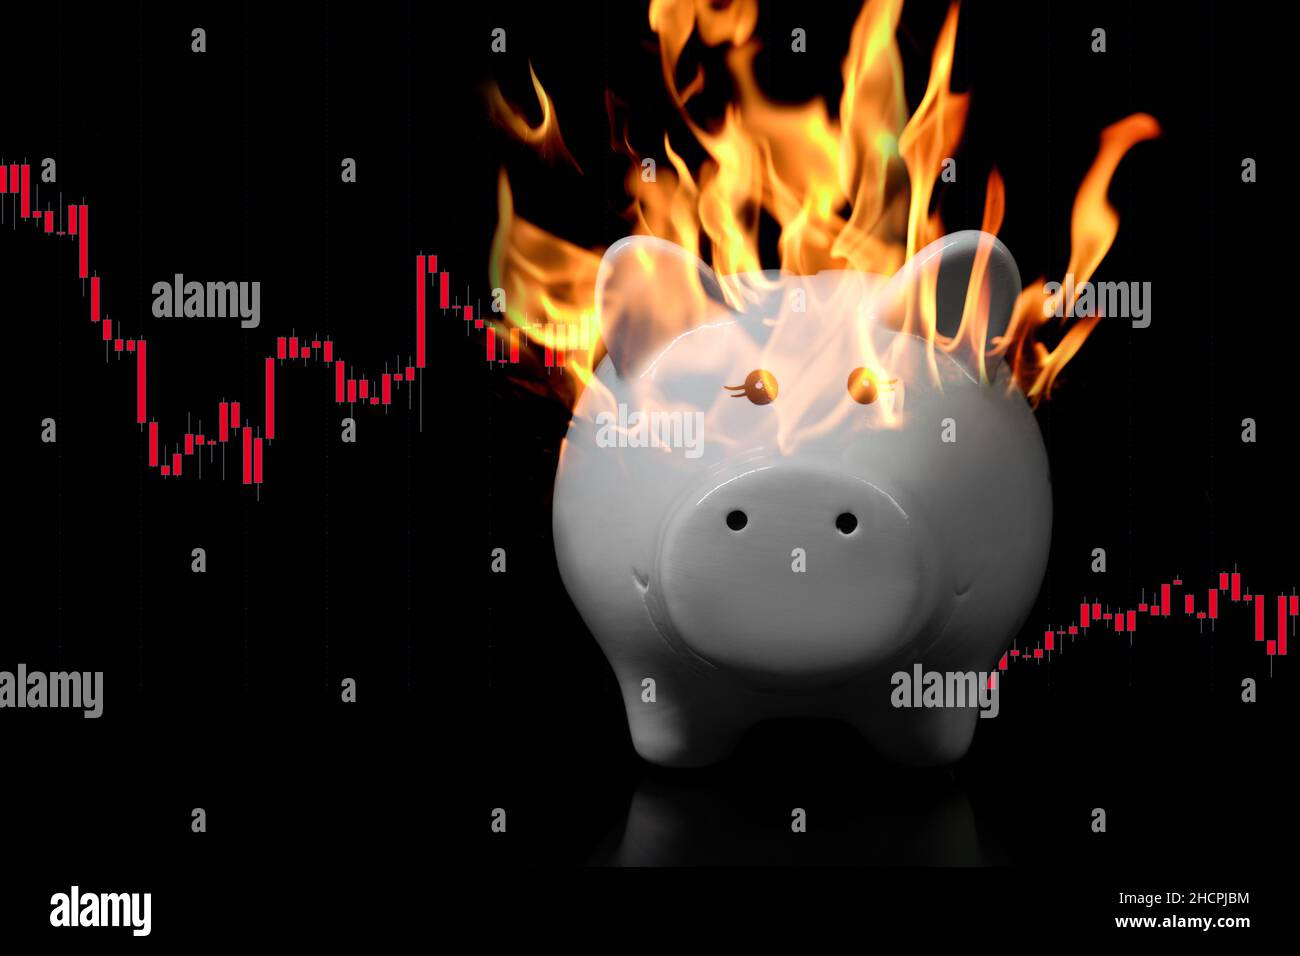 White piggy bank on fire on a very dark surface with descending red candle chart behind. Concept for economic crisis, inflation, devaluation Stock Photo